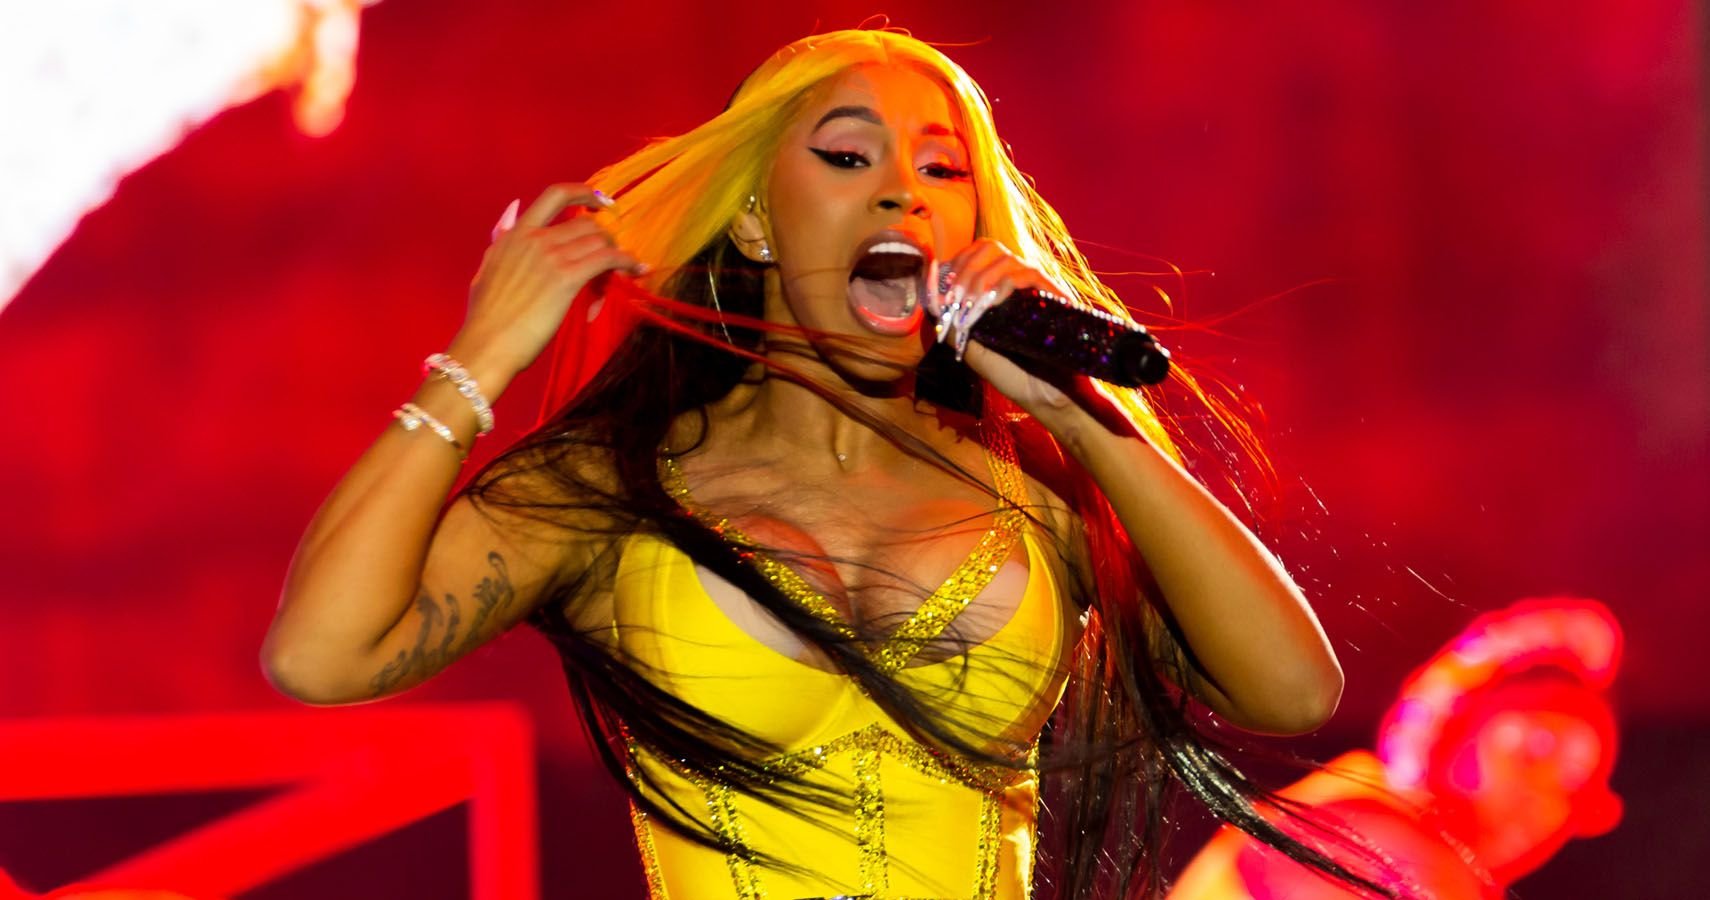 Cardi B Sued For Damages After Refusing To Give Autograph